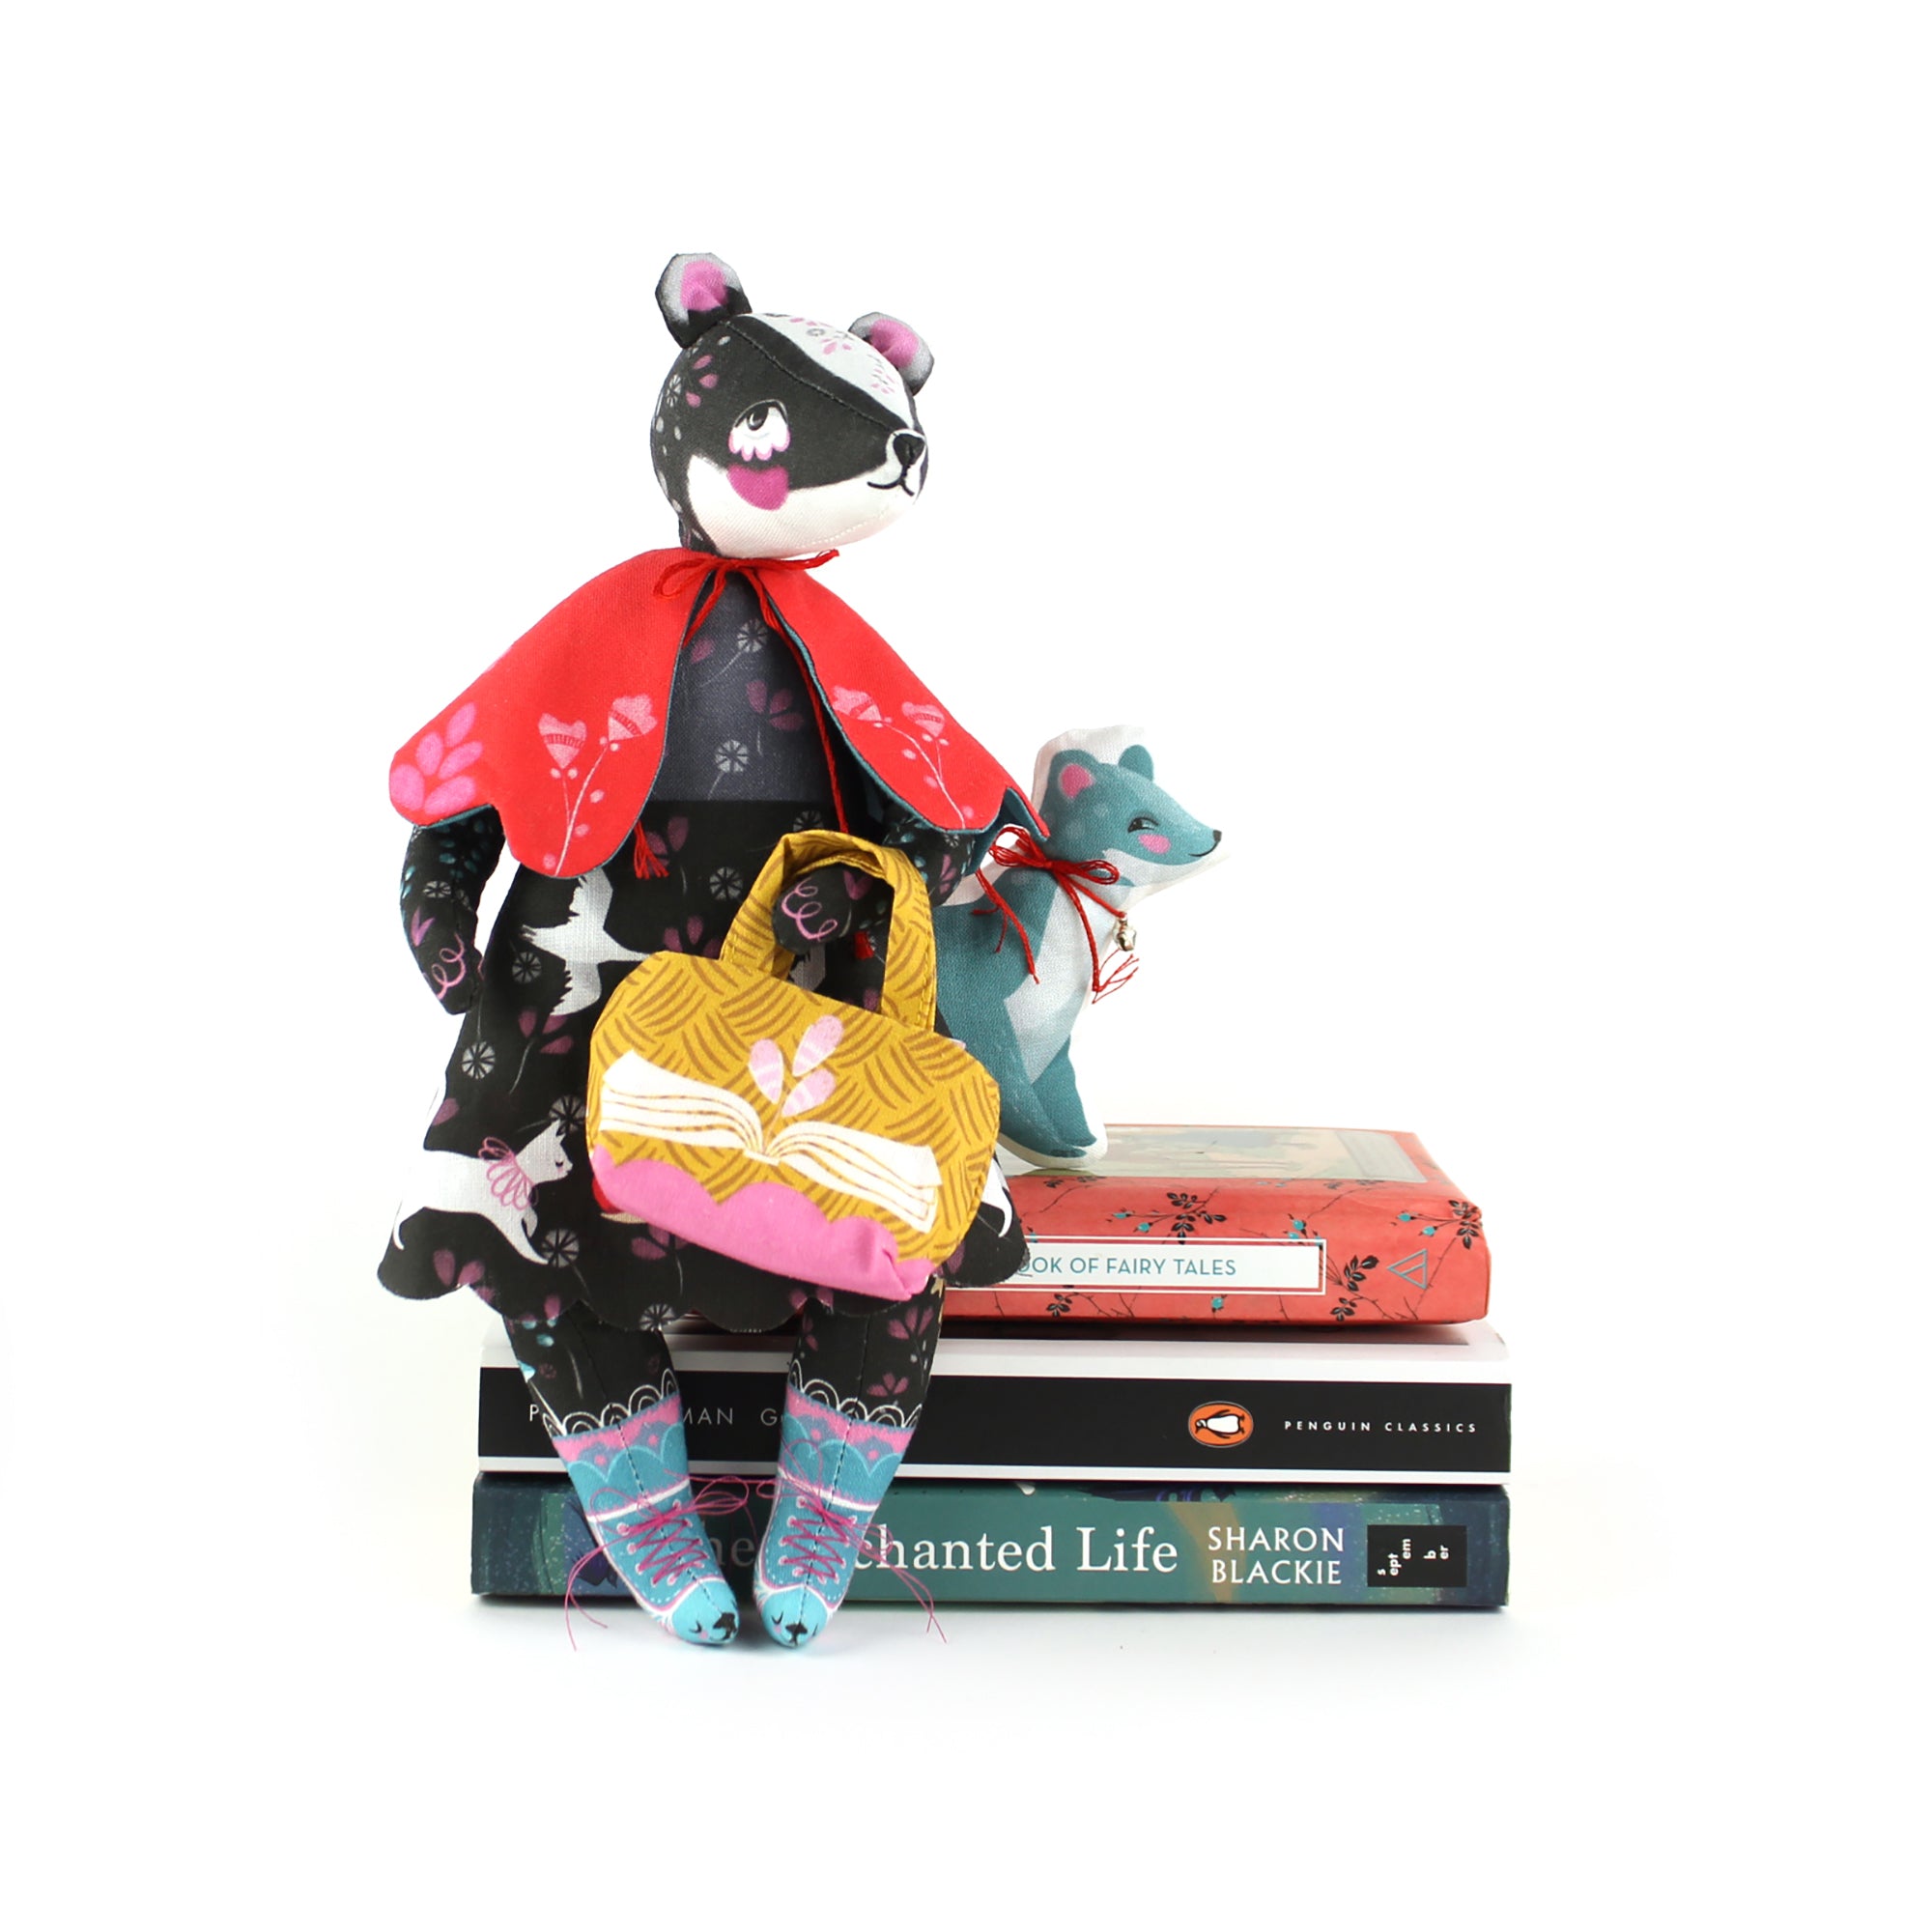 DIY Kit - Bibli the Badger Librarian and the singing Stoat with 2 fairytale books- sewing doll STUFFING NOT included FREE UK SHIPPING